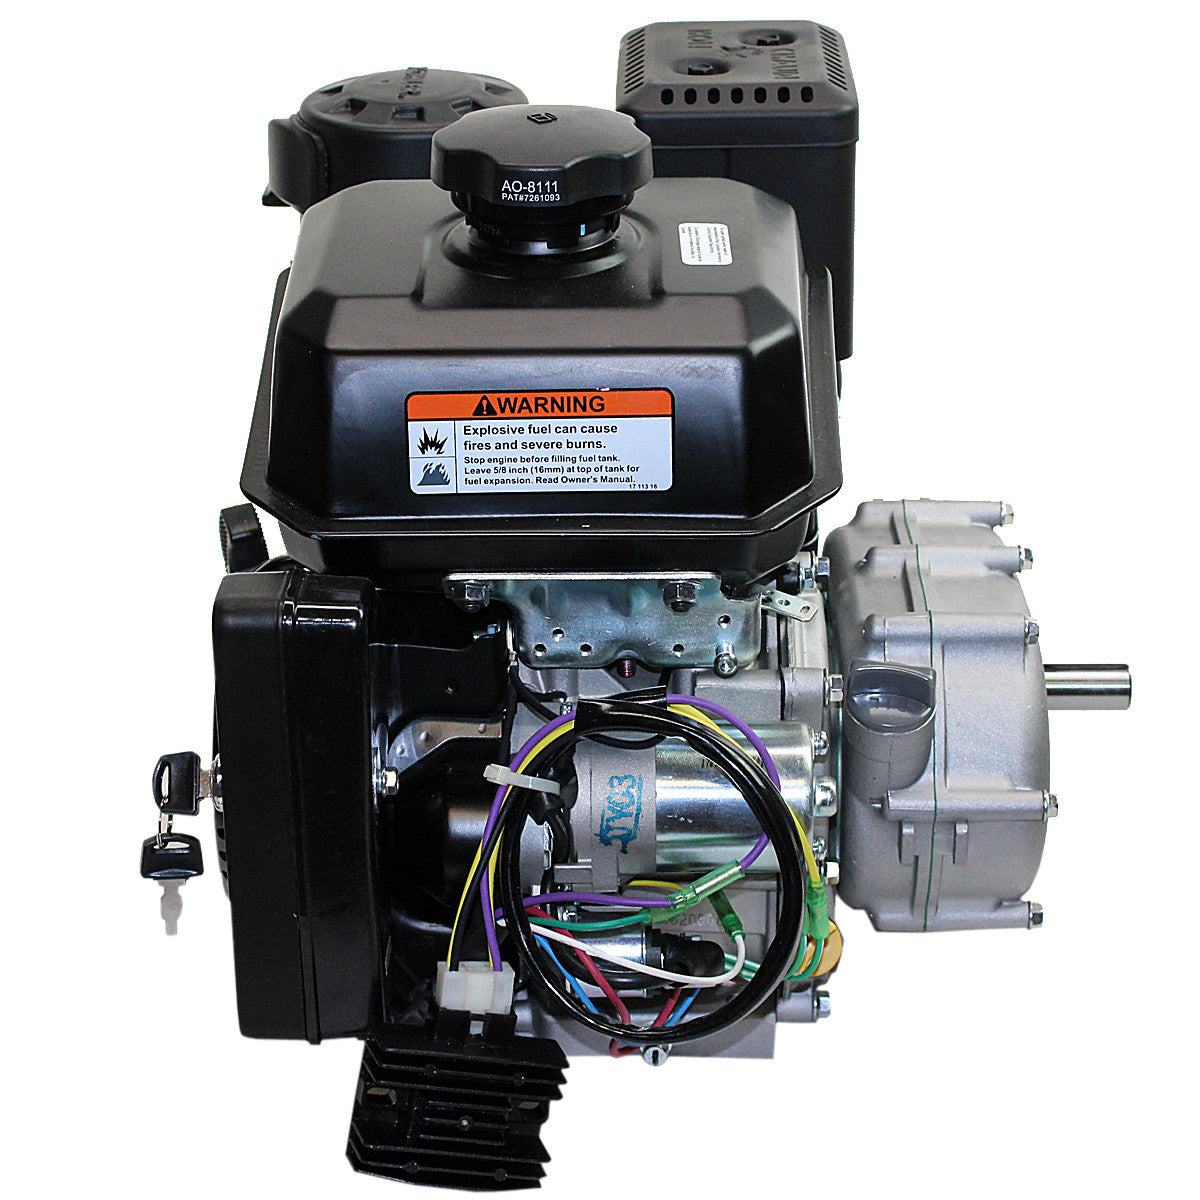 Kohler Command pro 7HP Replacement Engine #CH270-3038